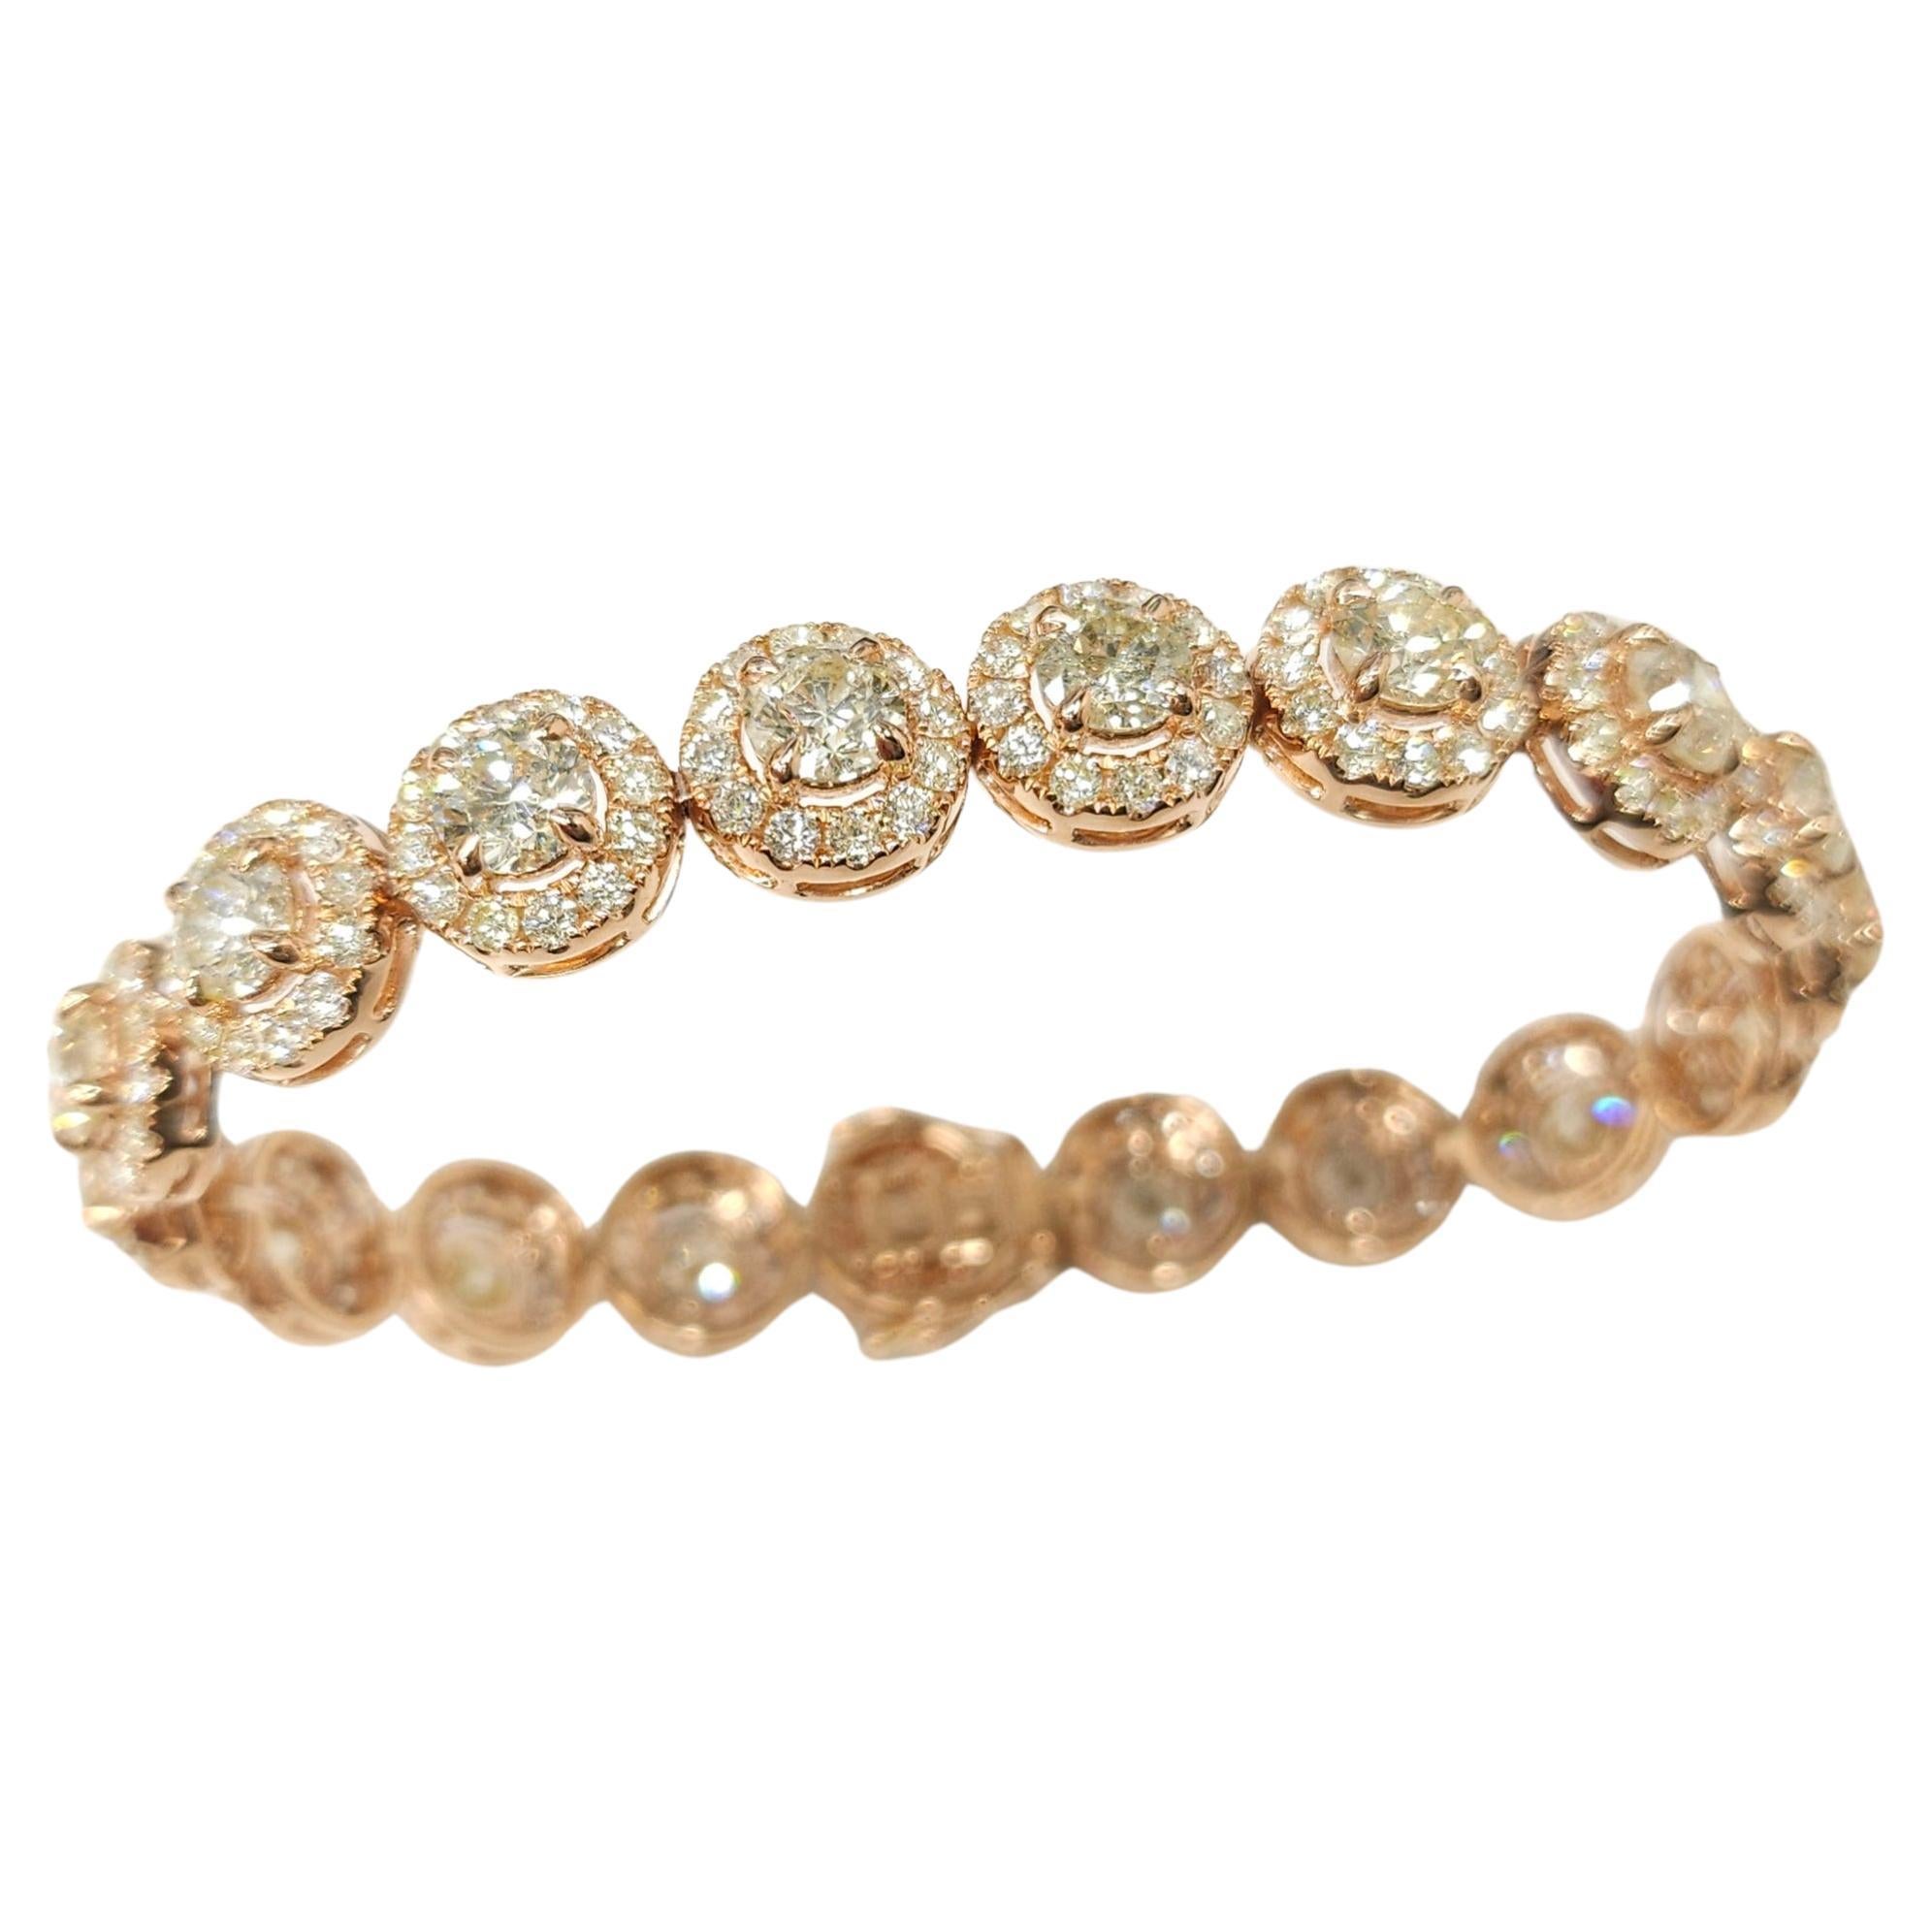 Prepare to fall in love with the sheer radiance and elegance of this exquisite 12.25 Carat Total Round Diamond Tennis Bracelet. Crafted in luxurious 18K rose gold, this bracelet showcases a stunning single row halo design that is sure to captivate